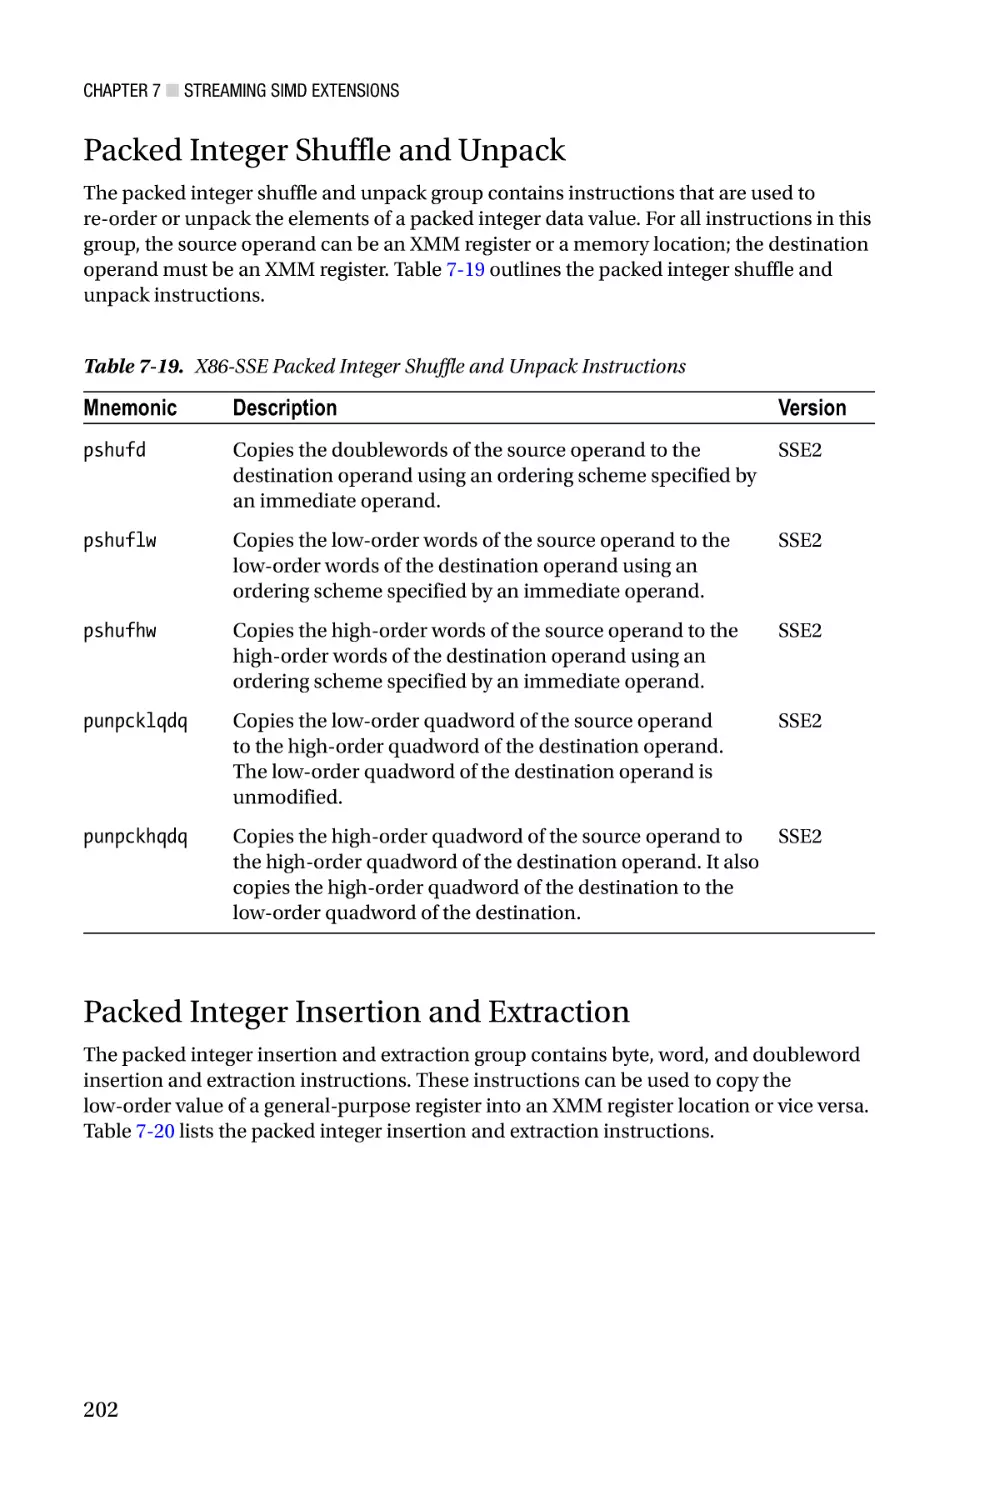 Packed Integer Shuffle and Unpack
Packed Integer Insertion and Extraction